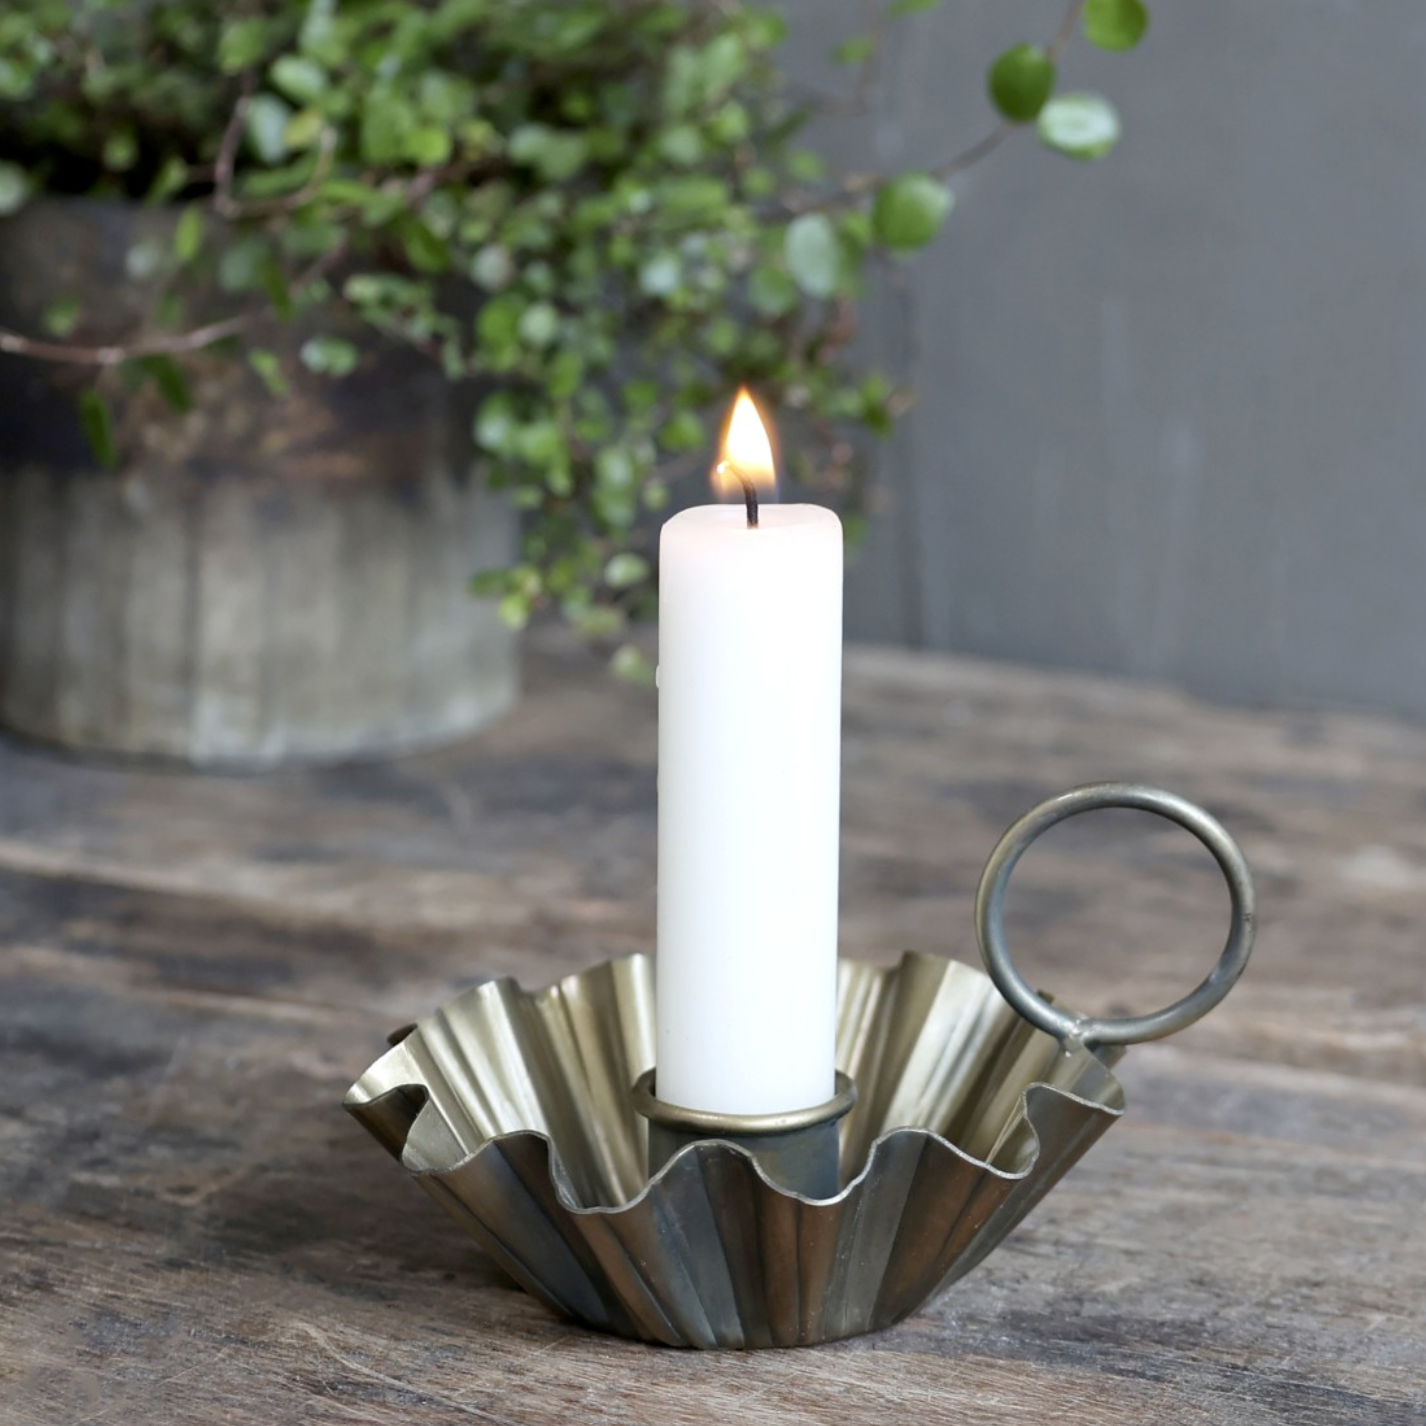 An antique brass candlestick holder with a white lit dinner candle.